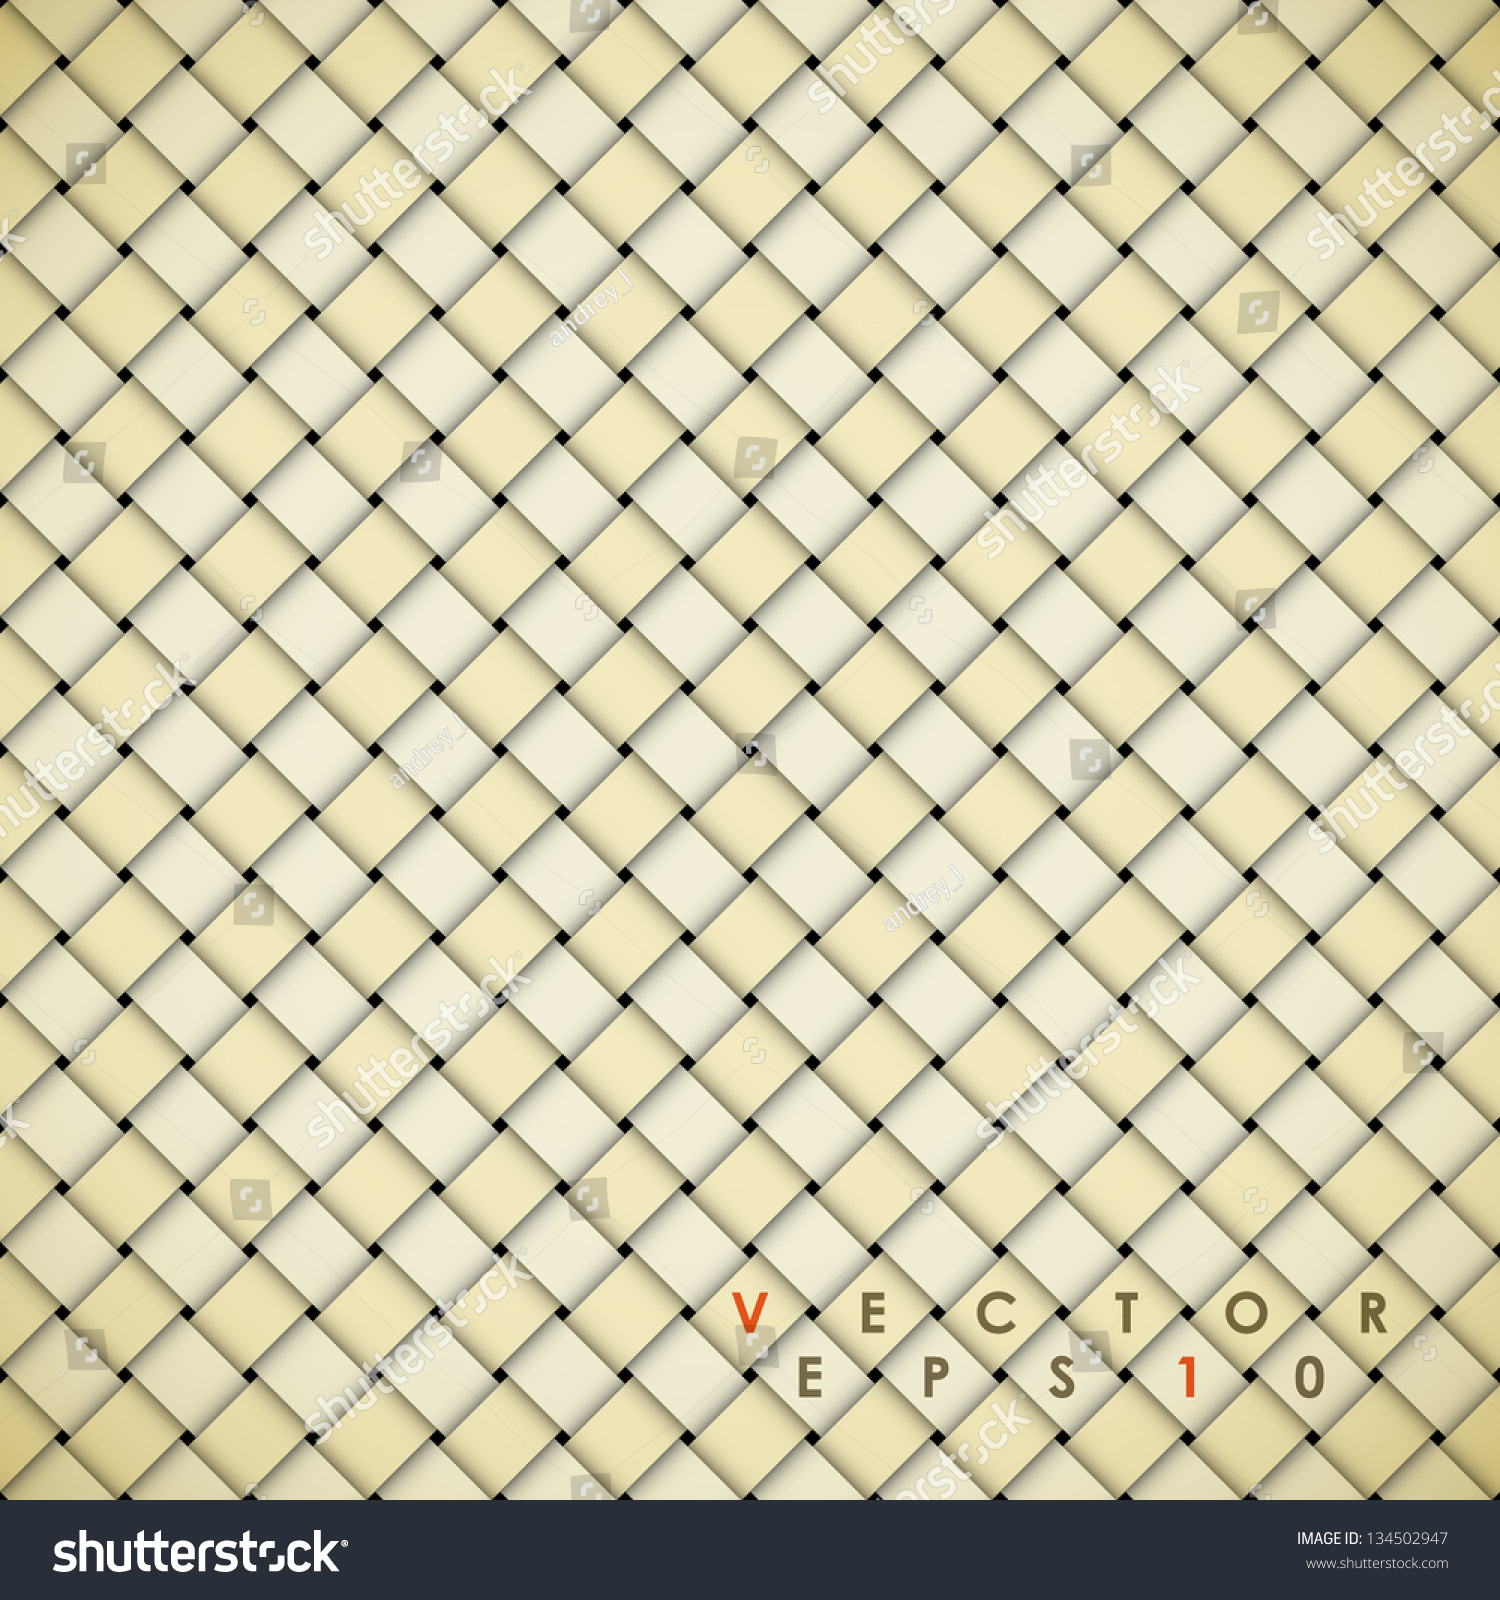 SVG of Tiles background. Seamless texture. Vector svg